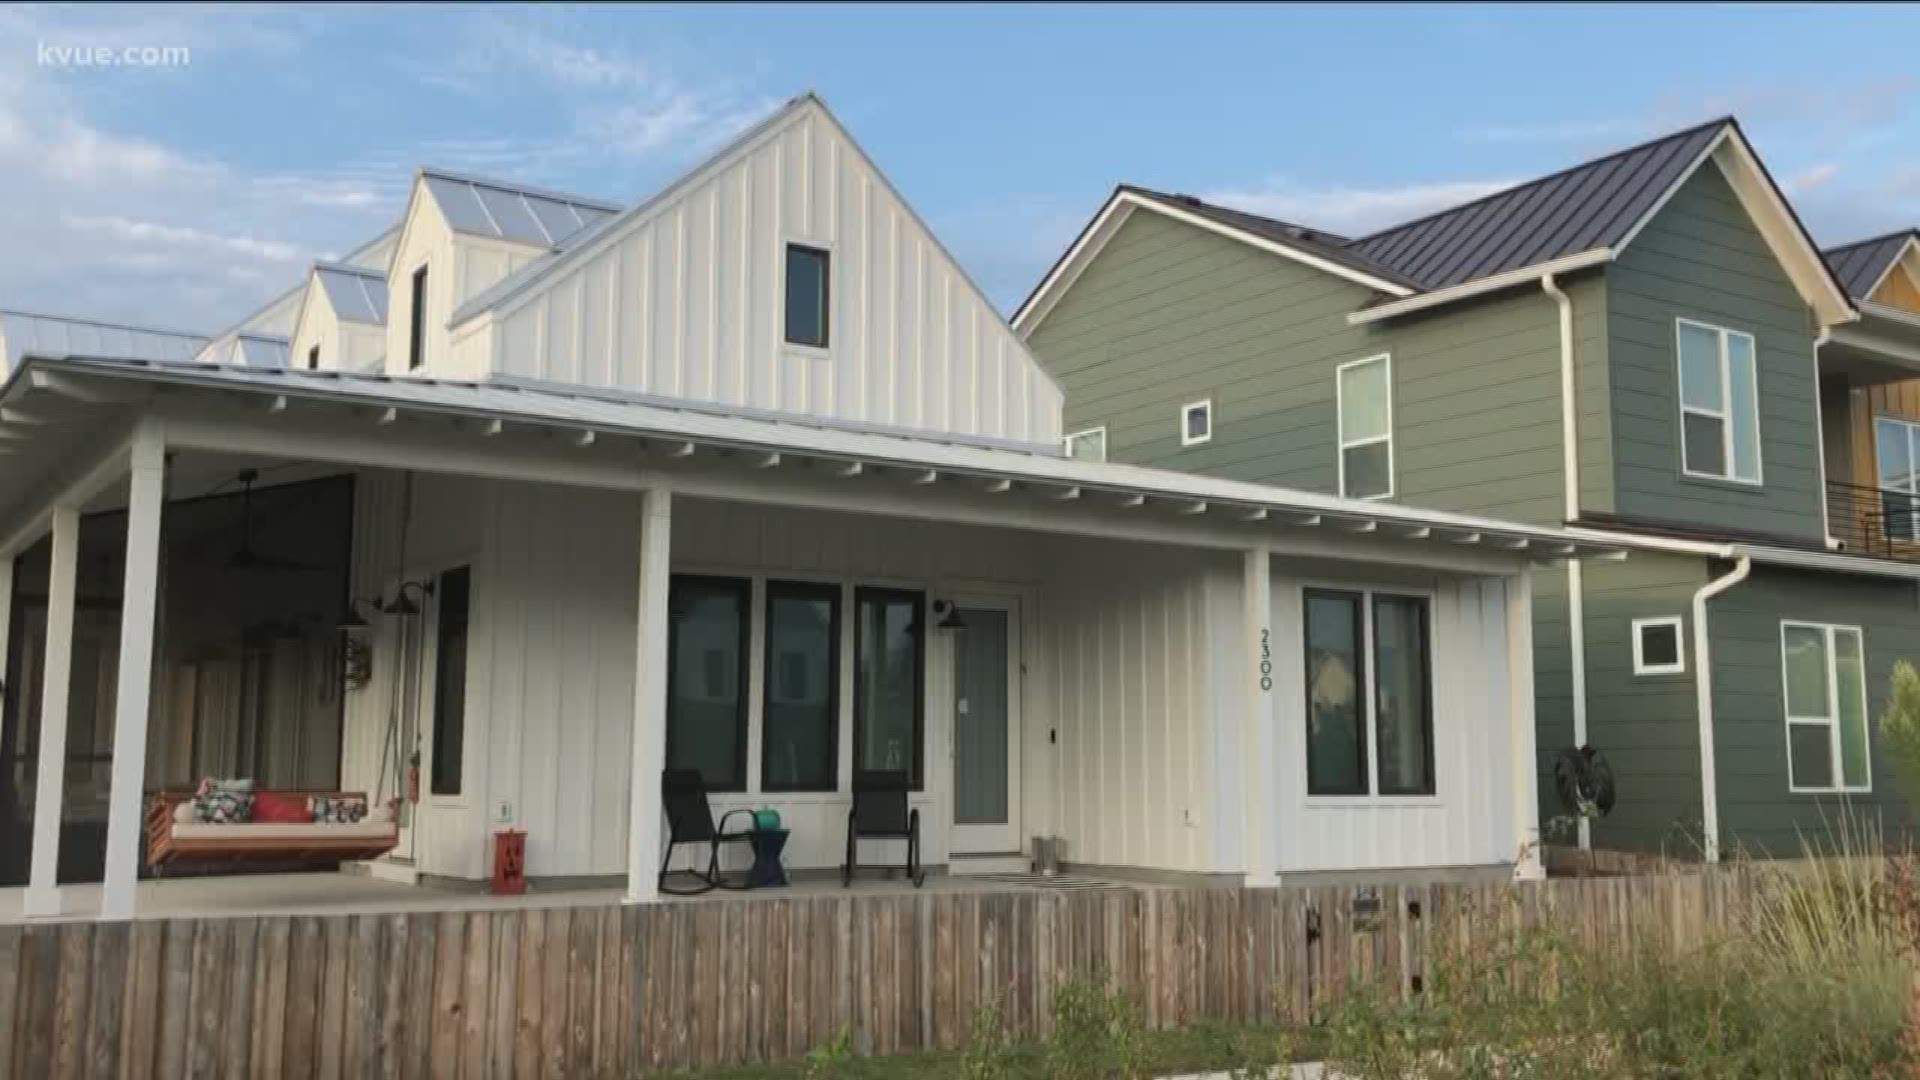 After our investigation revealed developers often pay fees to the City of Austin to avoid putting in affordable housing, a lot of viewers had questions.